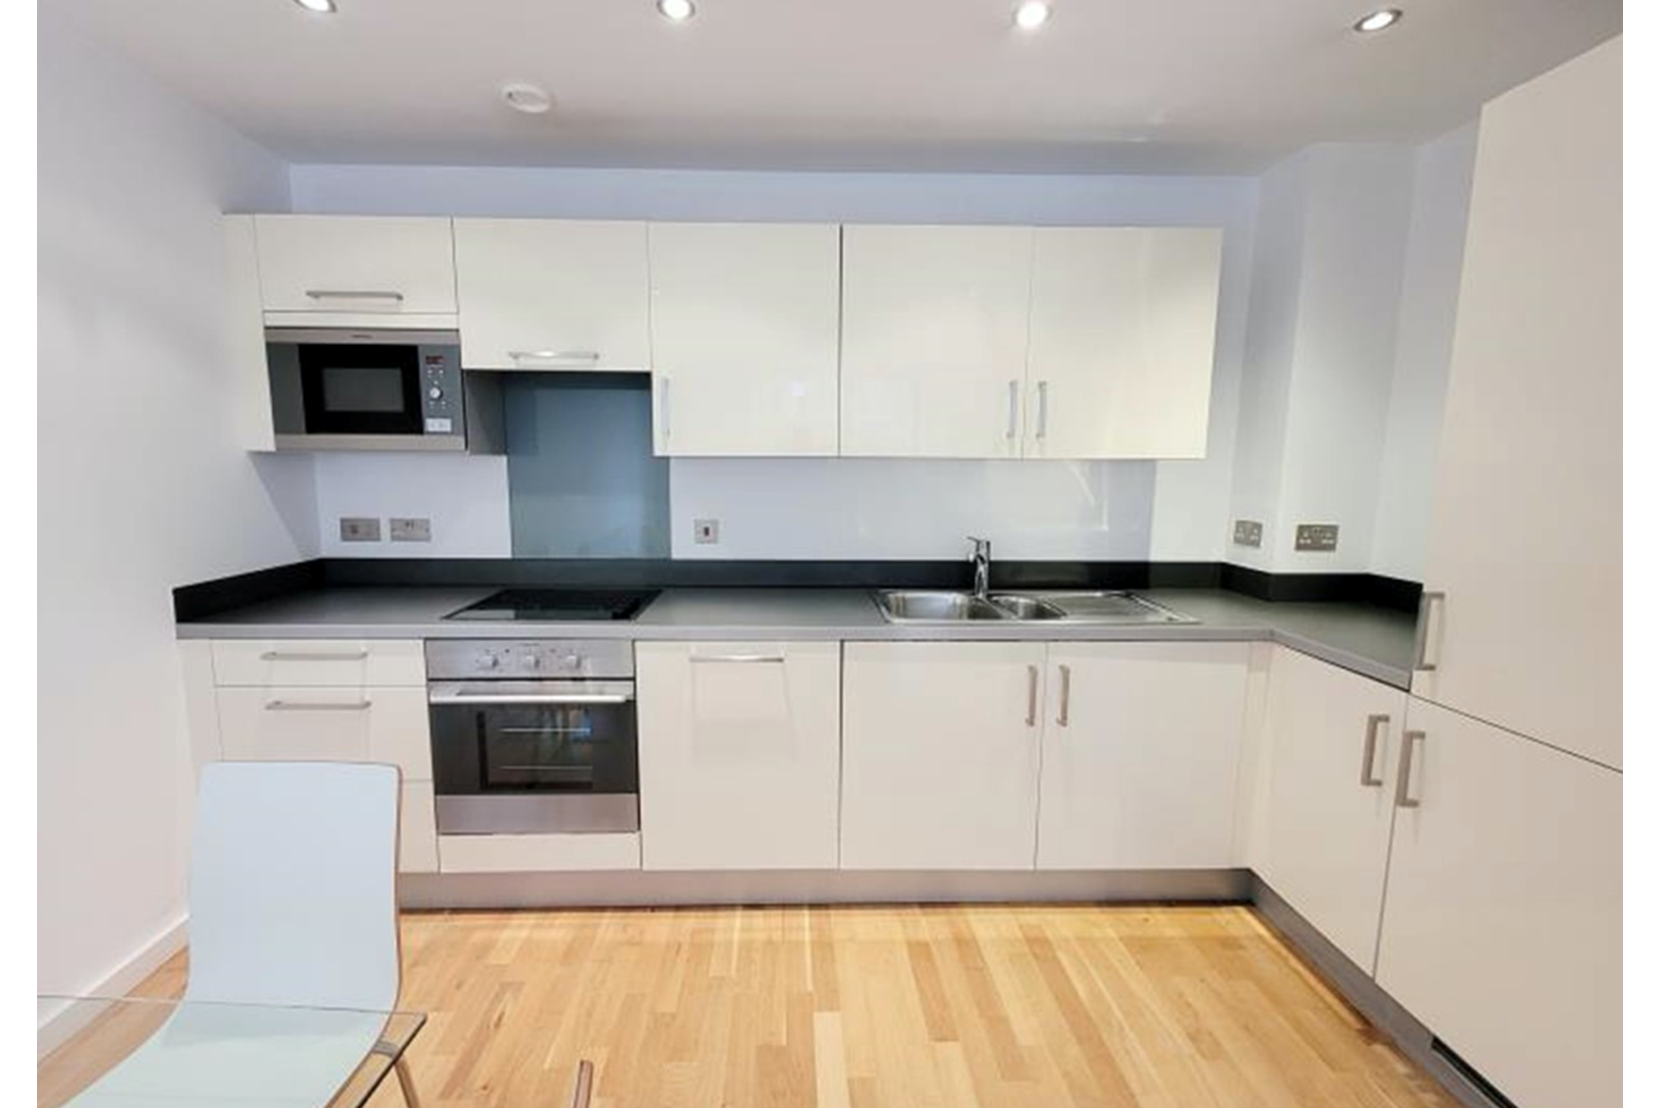 Apartments to Rent by Northern Group at Flint Glass Wharf, Manchester, M4, kitchen